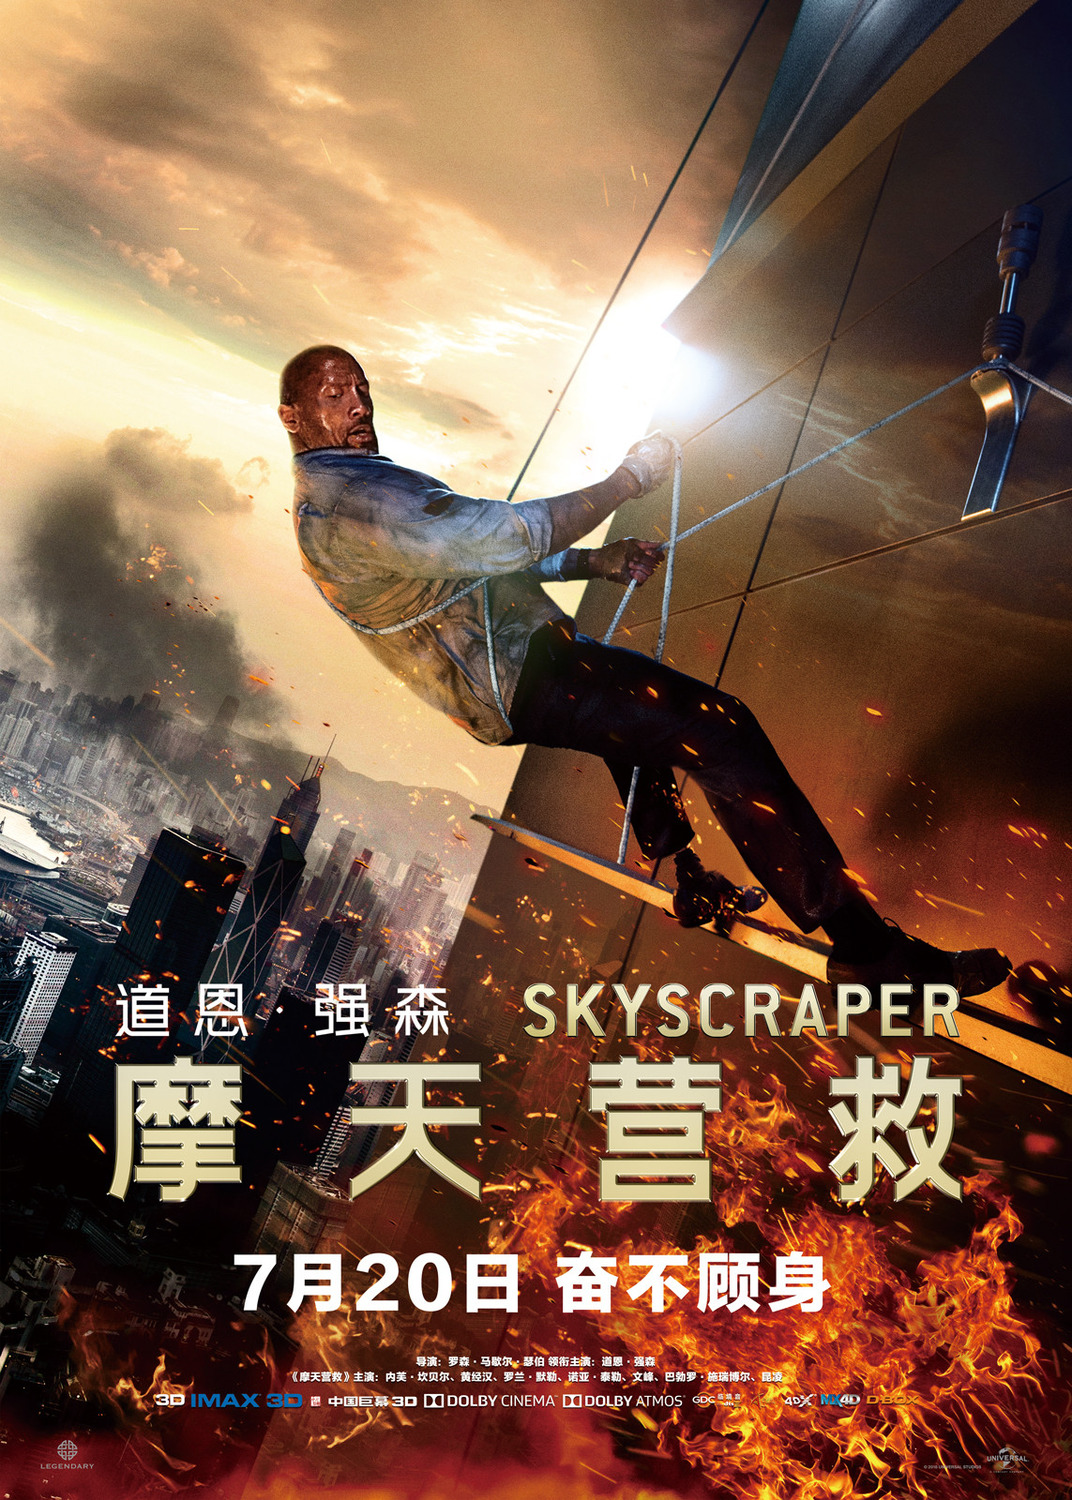 Extra Large Movie Poster Image for Skyscraper (#7 of 7)